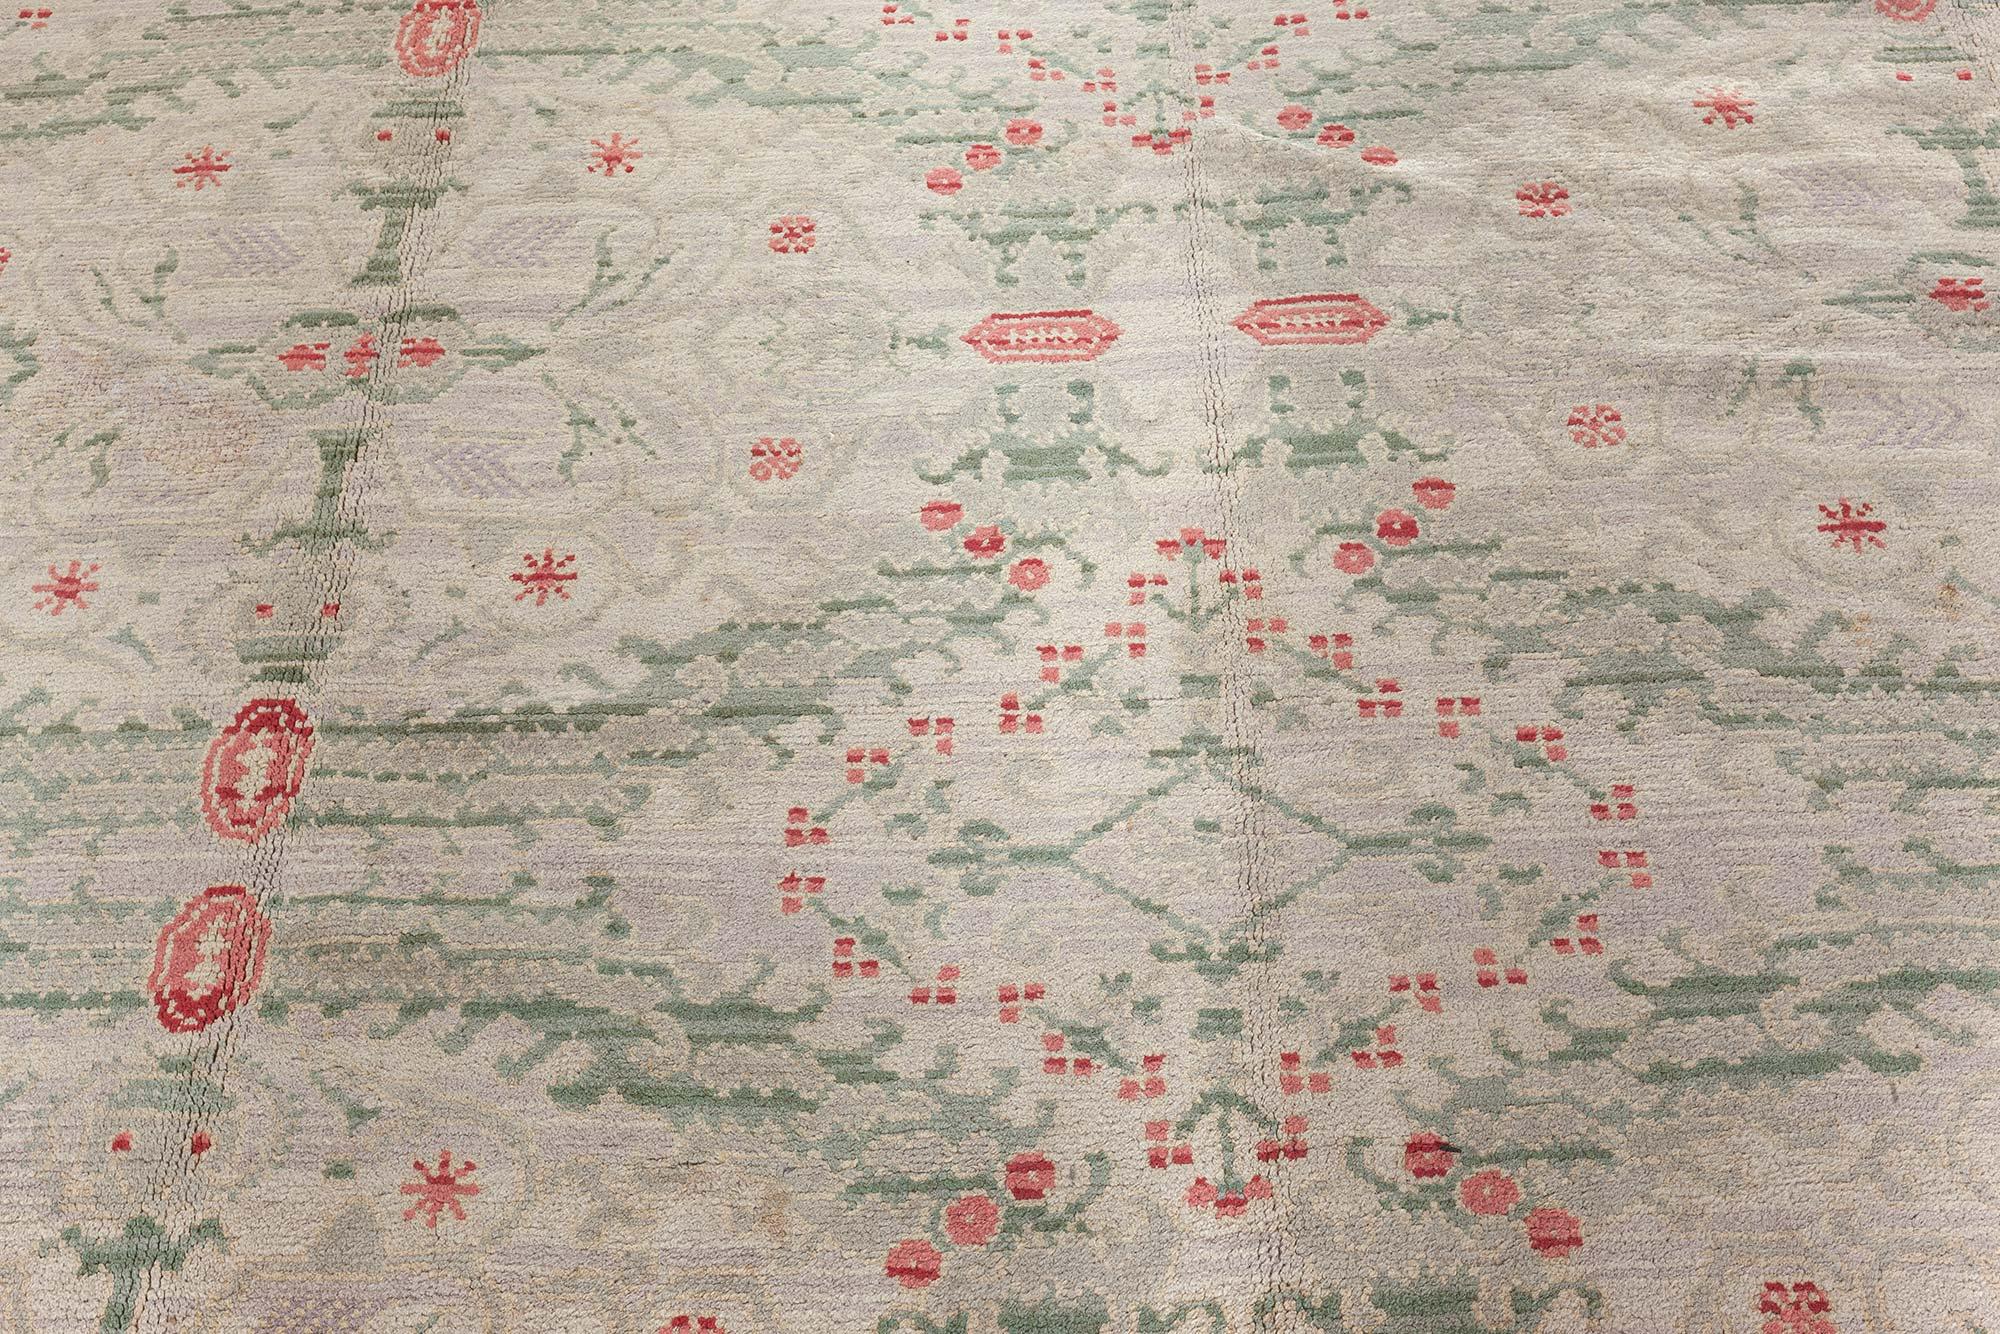 Mid-20th century Spanish floral handmade wool carpet (size adjusted)
Size: 12'0